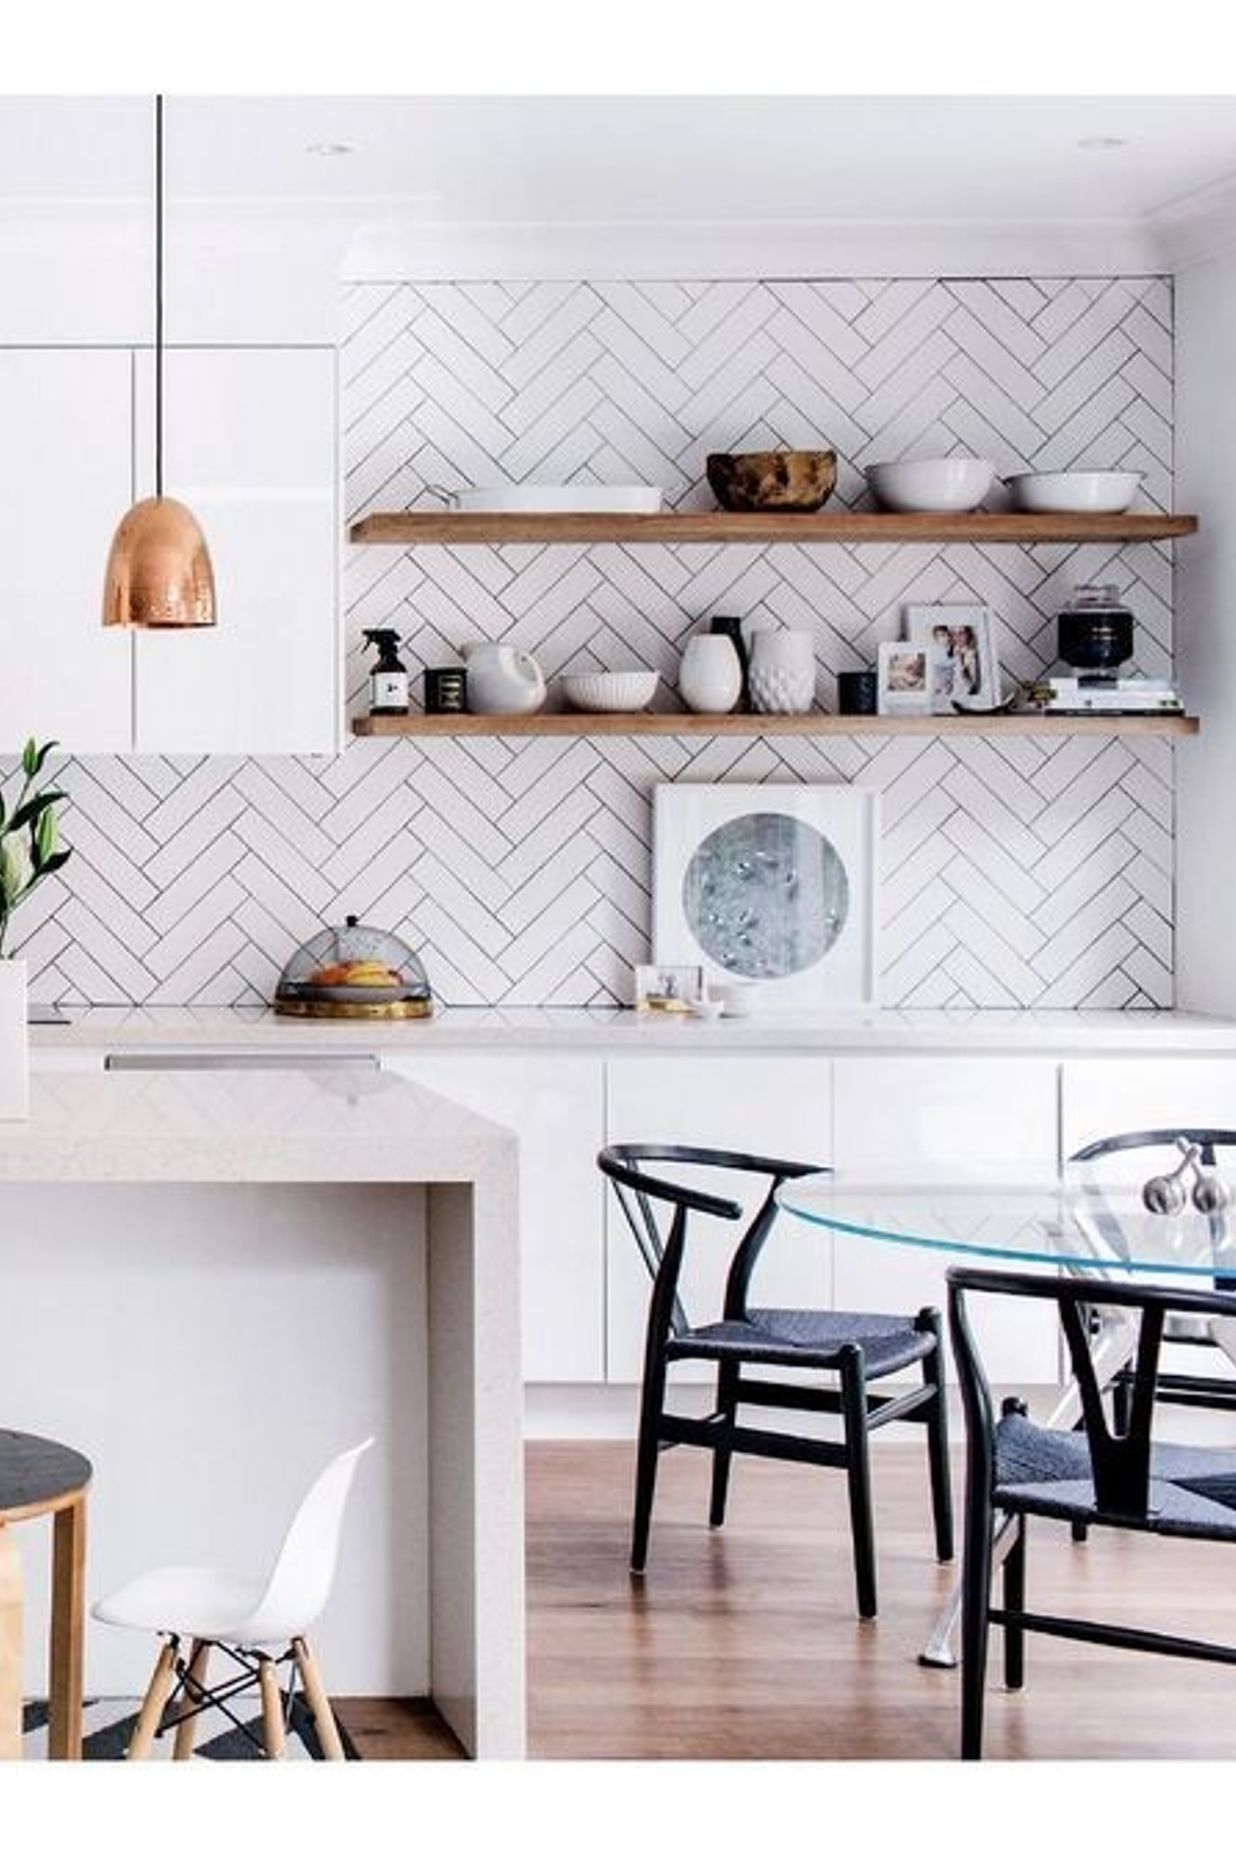 This kitchen features simple white subway tiles but the way they are installed is what actually adds a design element to an otherwise simple kitchen design. (Tile Depot 2021)